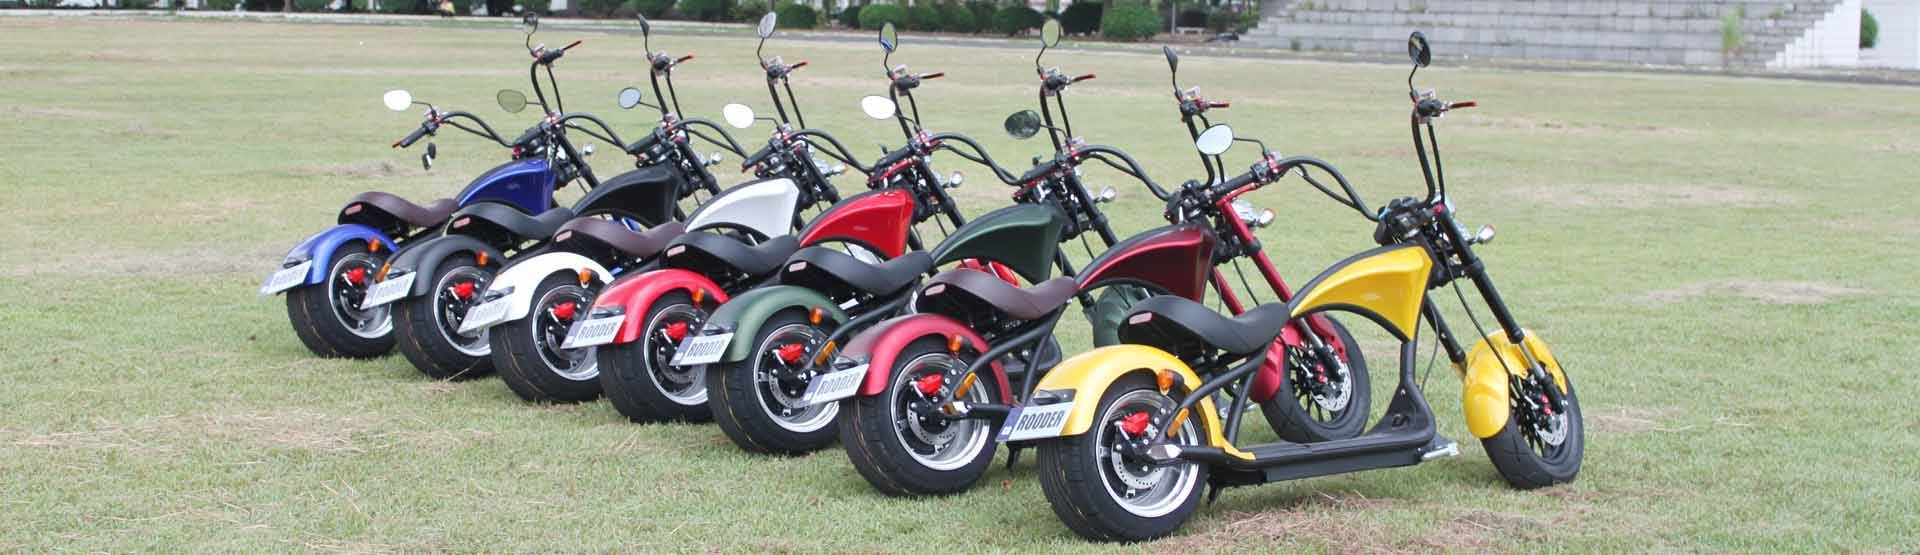 Rooder super m1 scooter citycoco